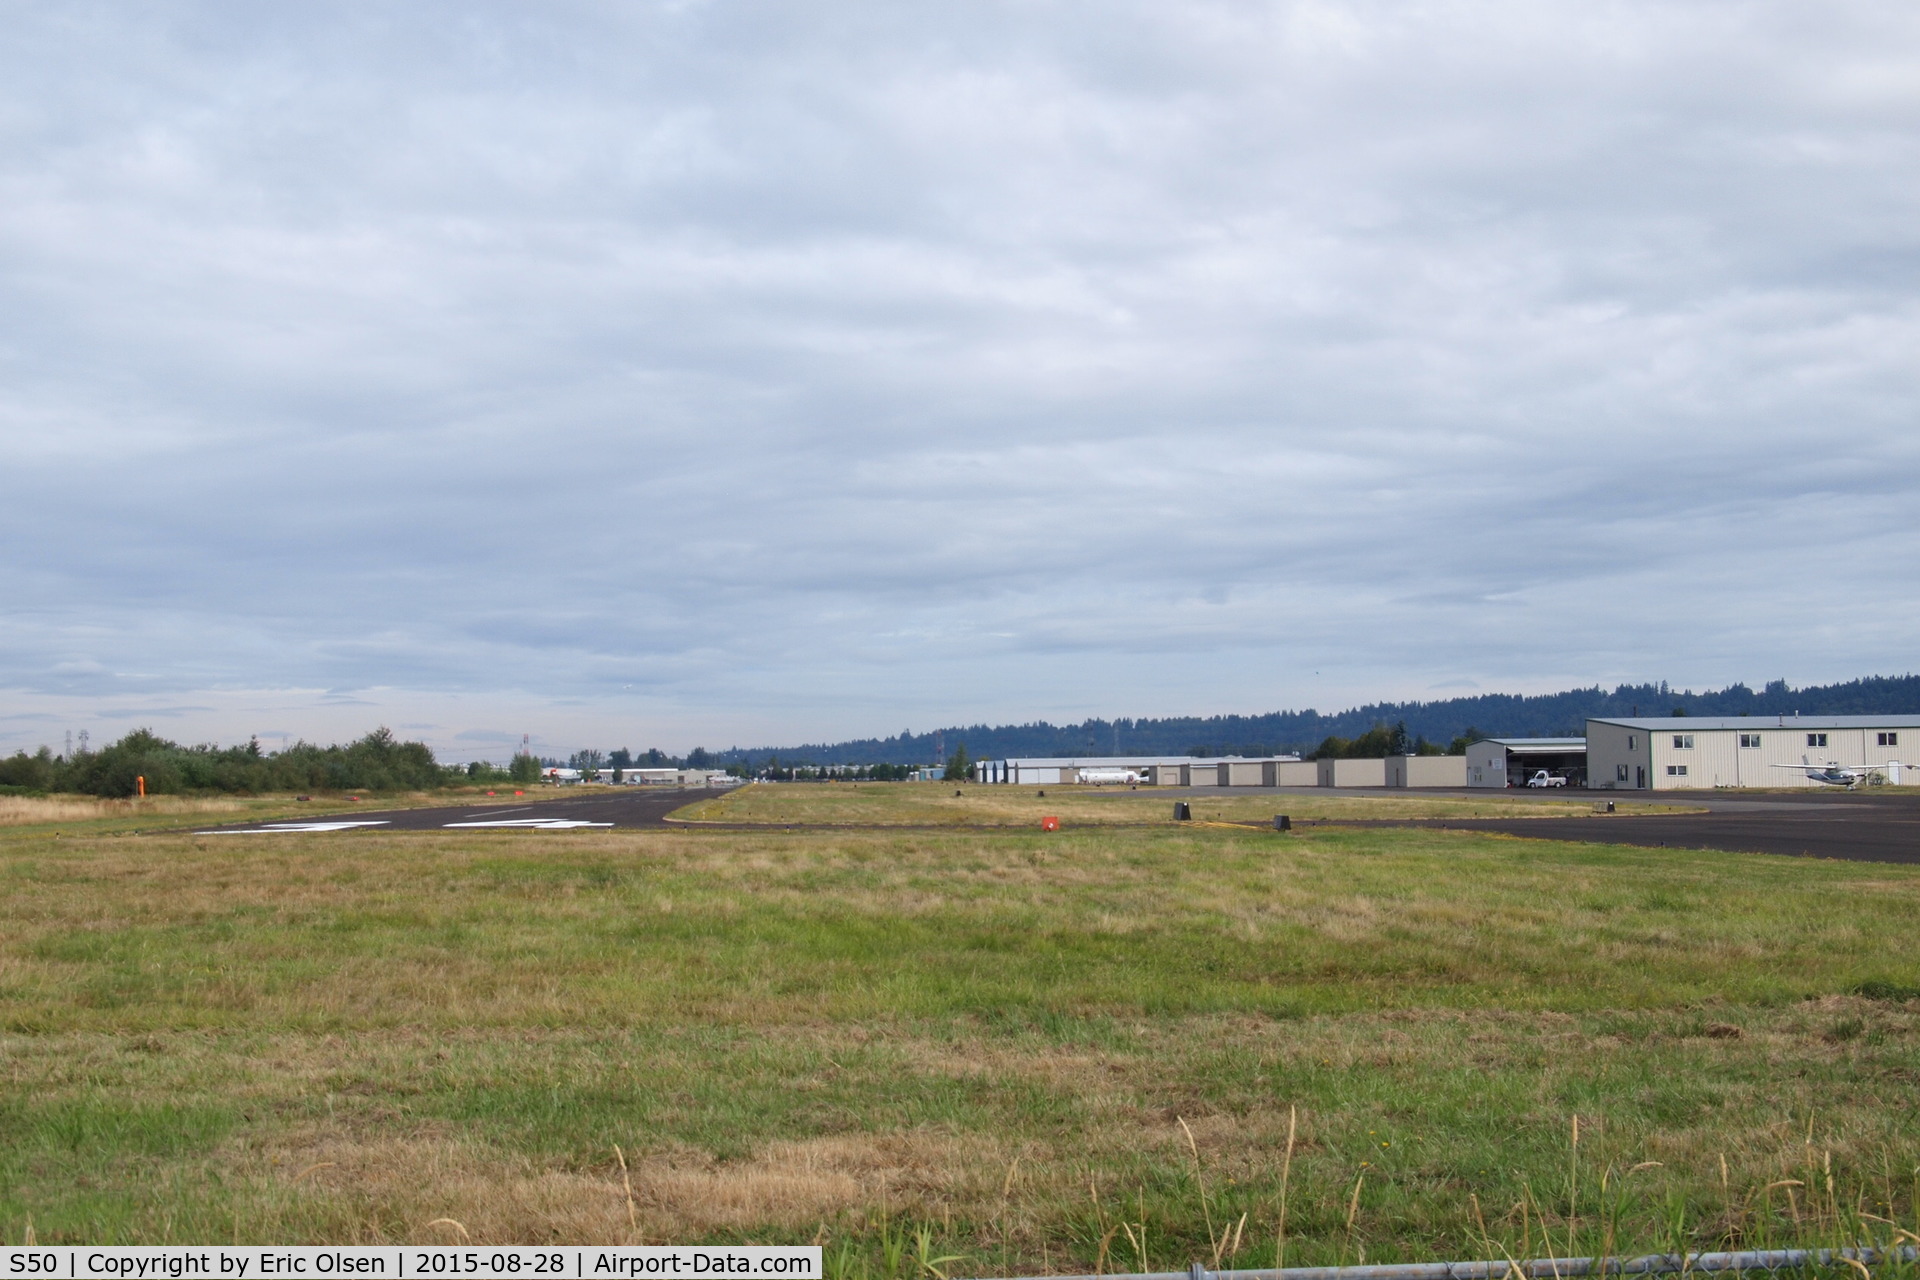 Auburn Municipal Airport (S50) - Looking north from the grass field outside the airport.